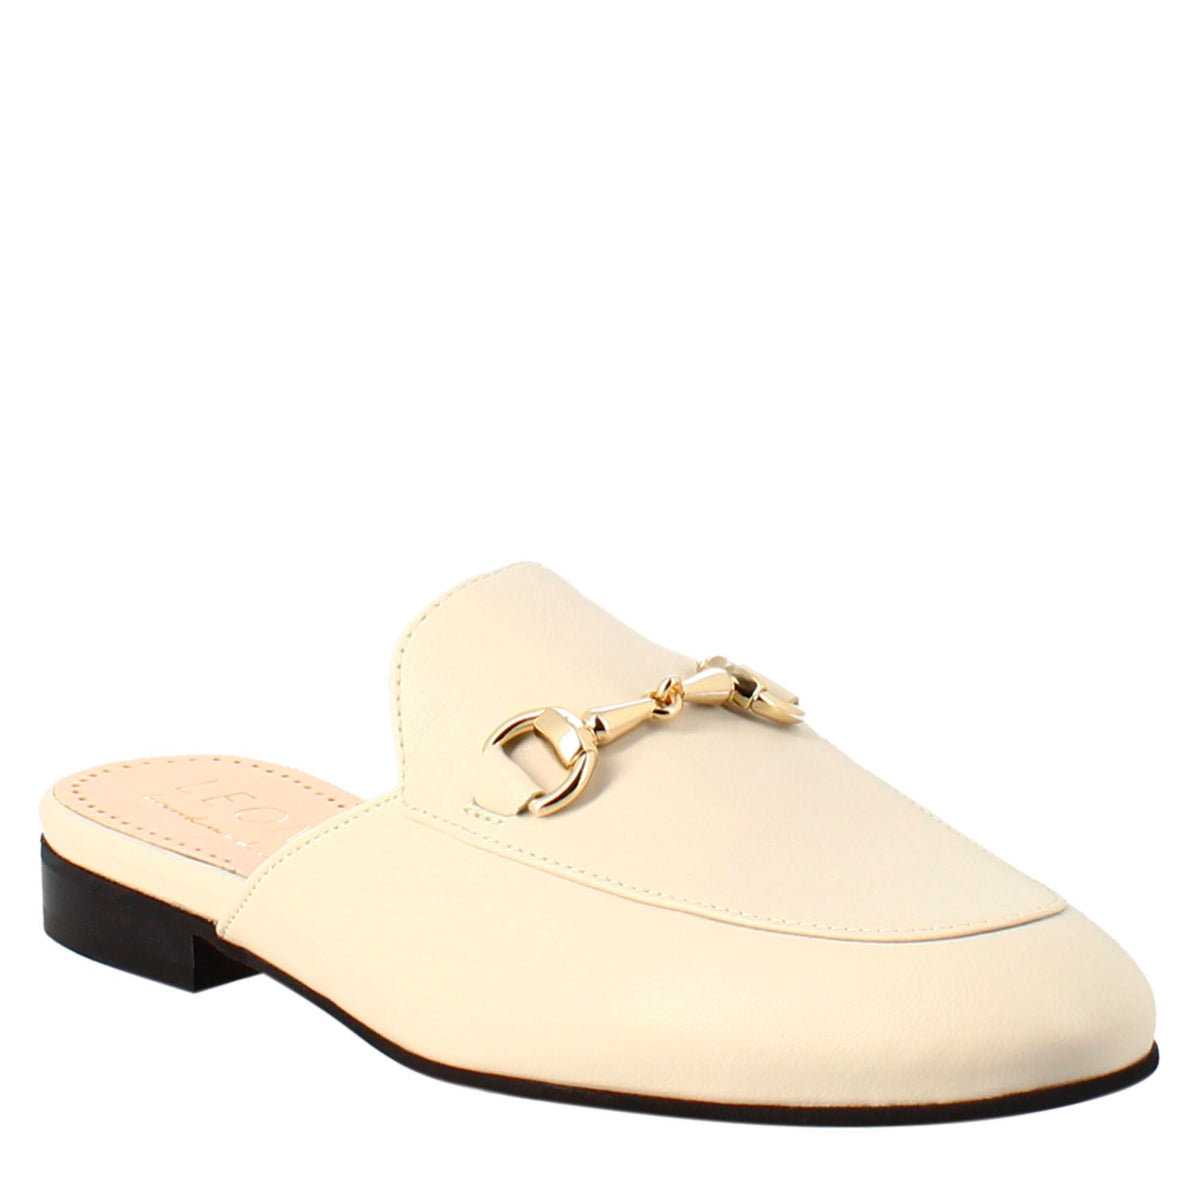 White sabot with golden buckle and real leather sole